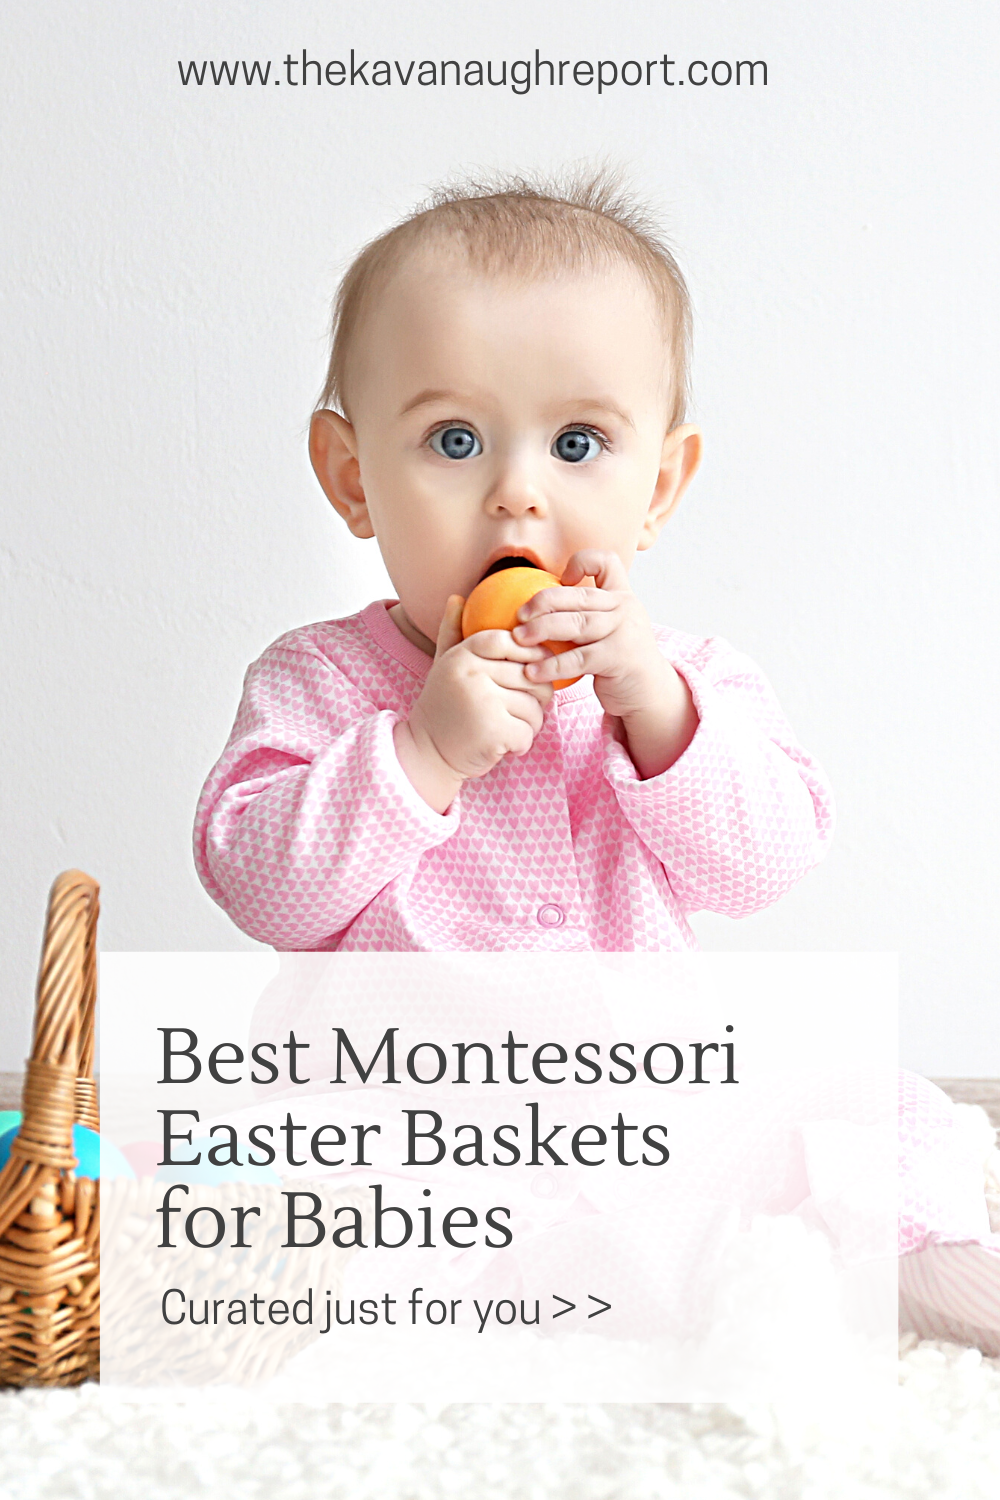 Having trouble figuring out what to put in your baby's first Easter basket? Look no further! As a Montessori family, we have some unique and thoughtful ideas for your baby's Easter celebration. It's all about developmental readiness, not just age. Discover curated suggestions for newborns, explorer babies, and moving babies.